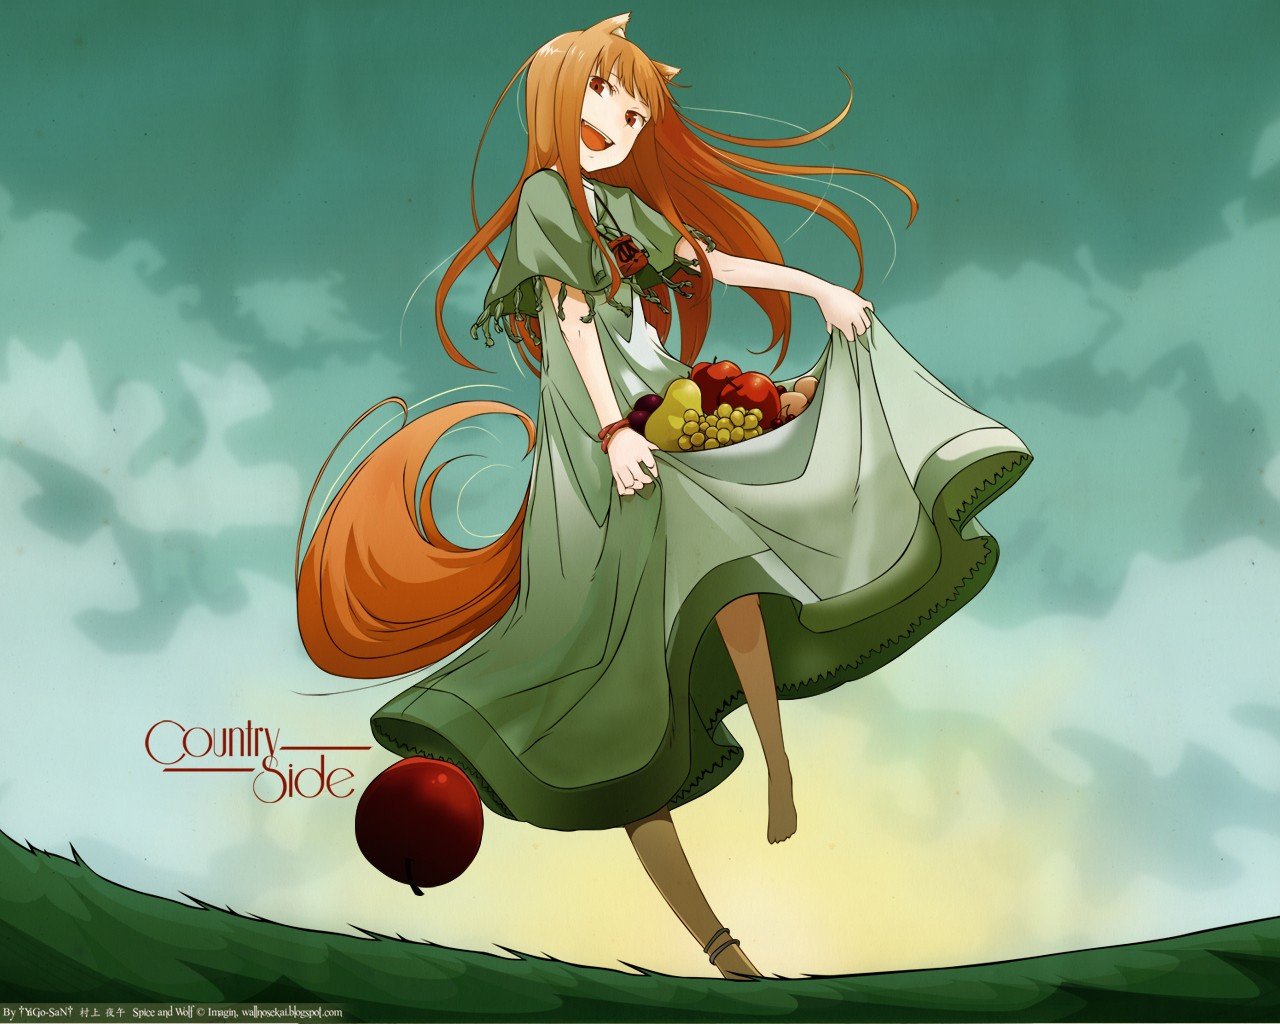 Spice and Wolf, Holo, Apples, Anime girls Wallpaper